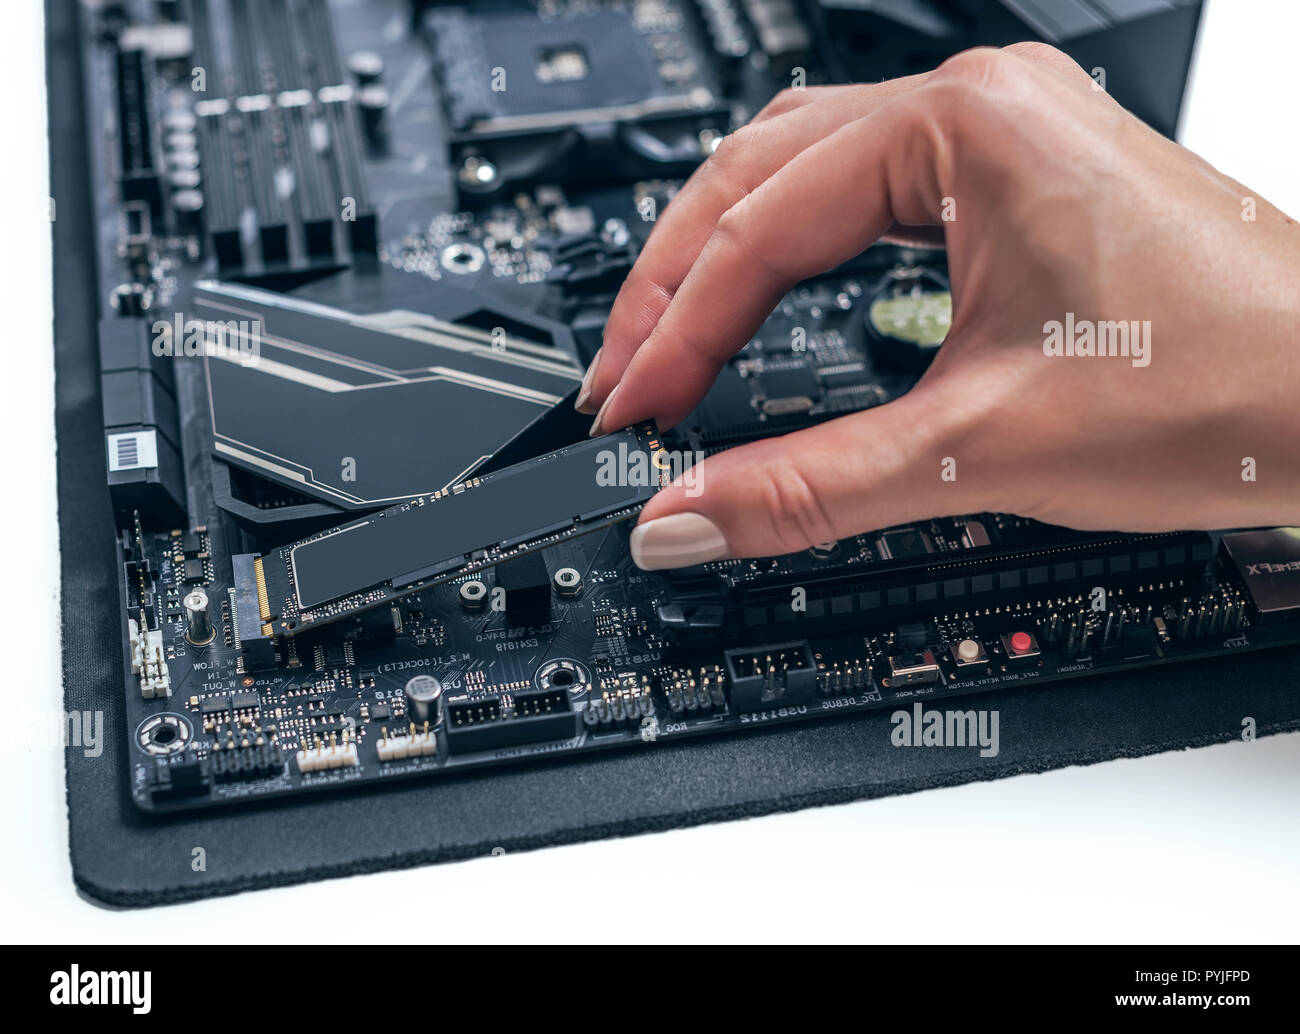 Hard disk SSD m2 on the motherboard Photo - Alamy